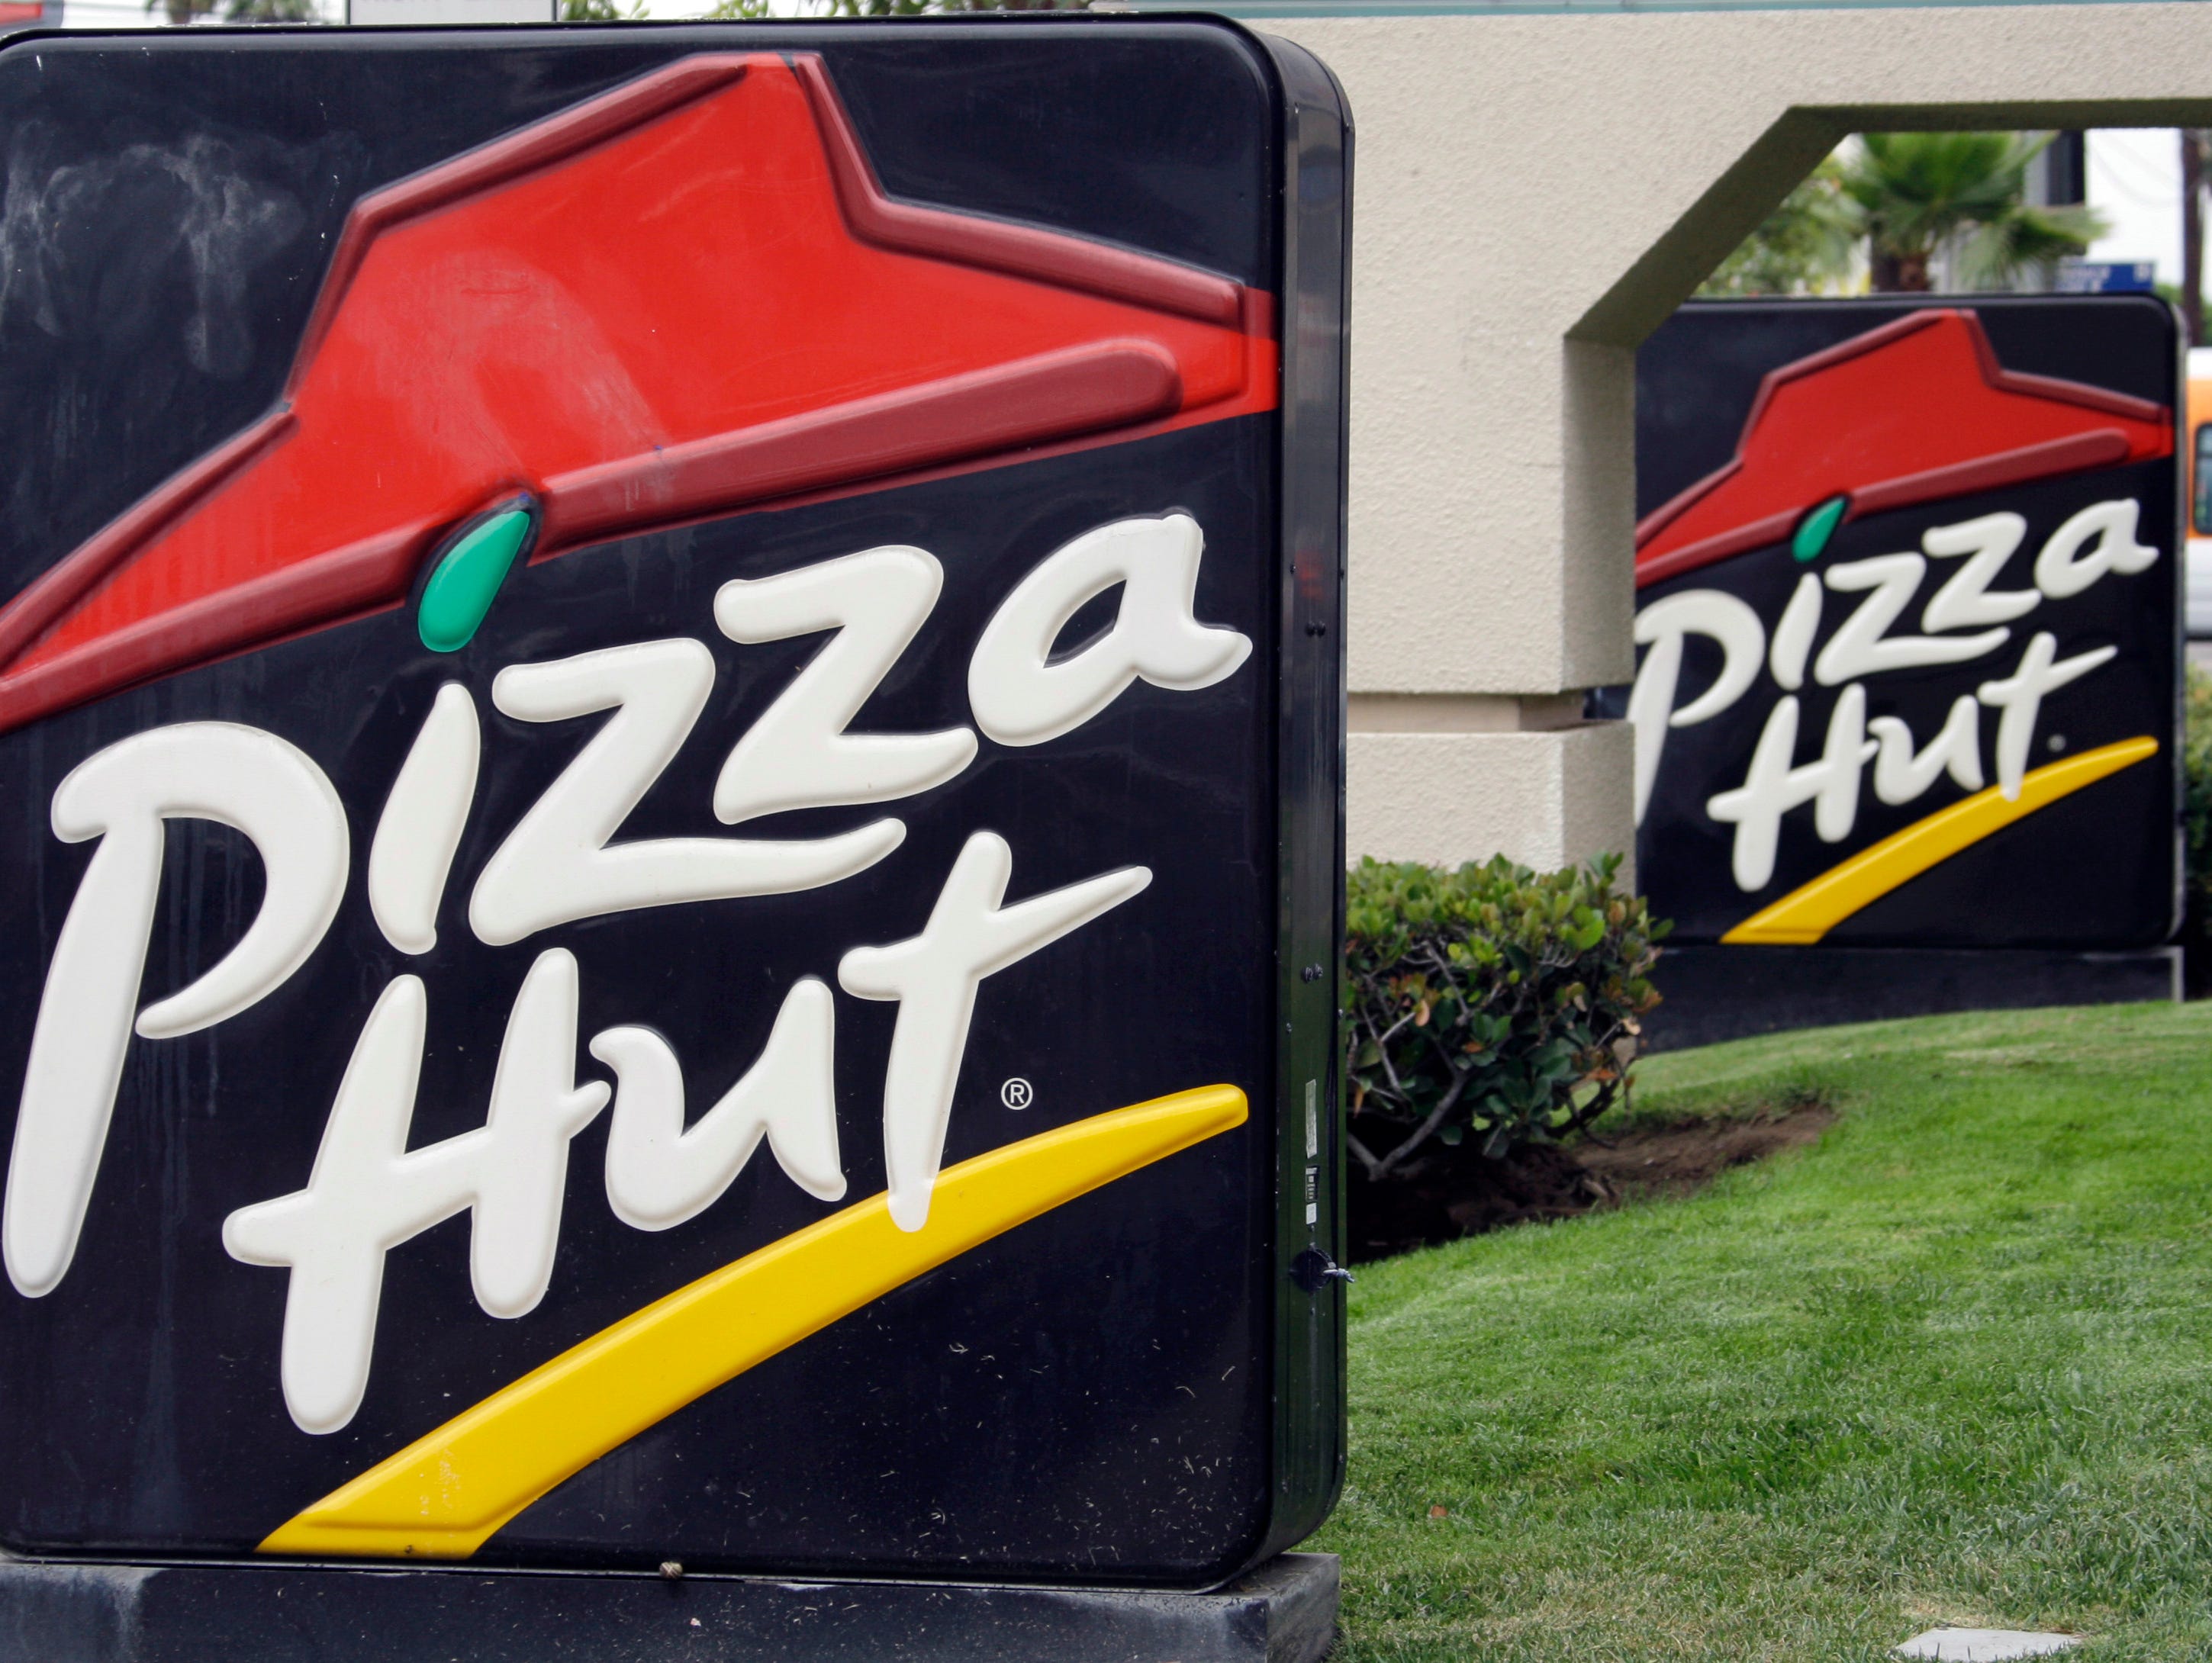 This Oct. 5, 2010 file photo shows a Pizza Hut restaurant in Los Angeles Tuesday, Oct. 5, 2010.